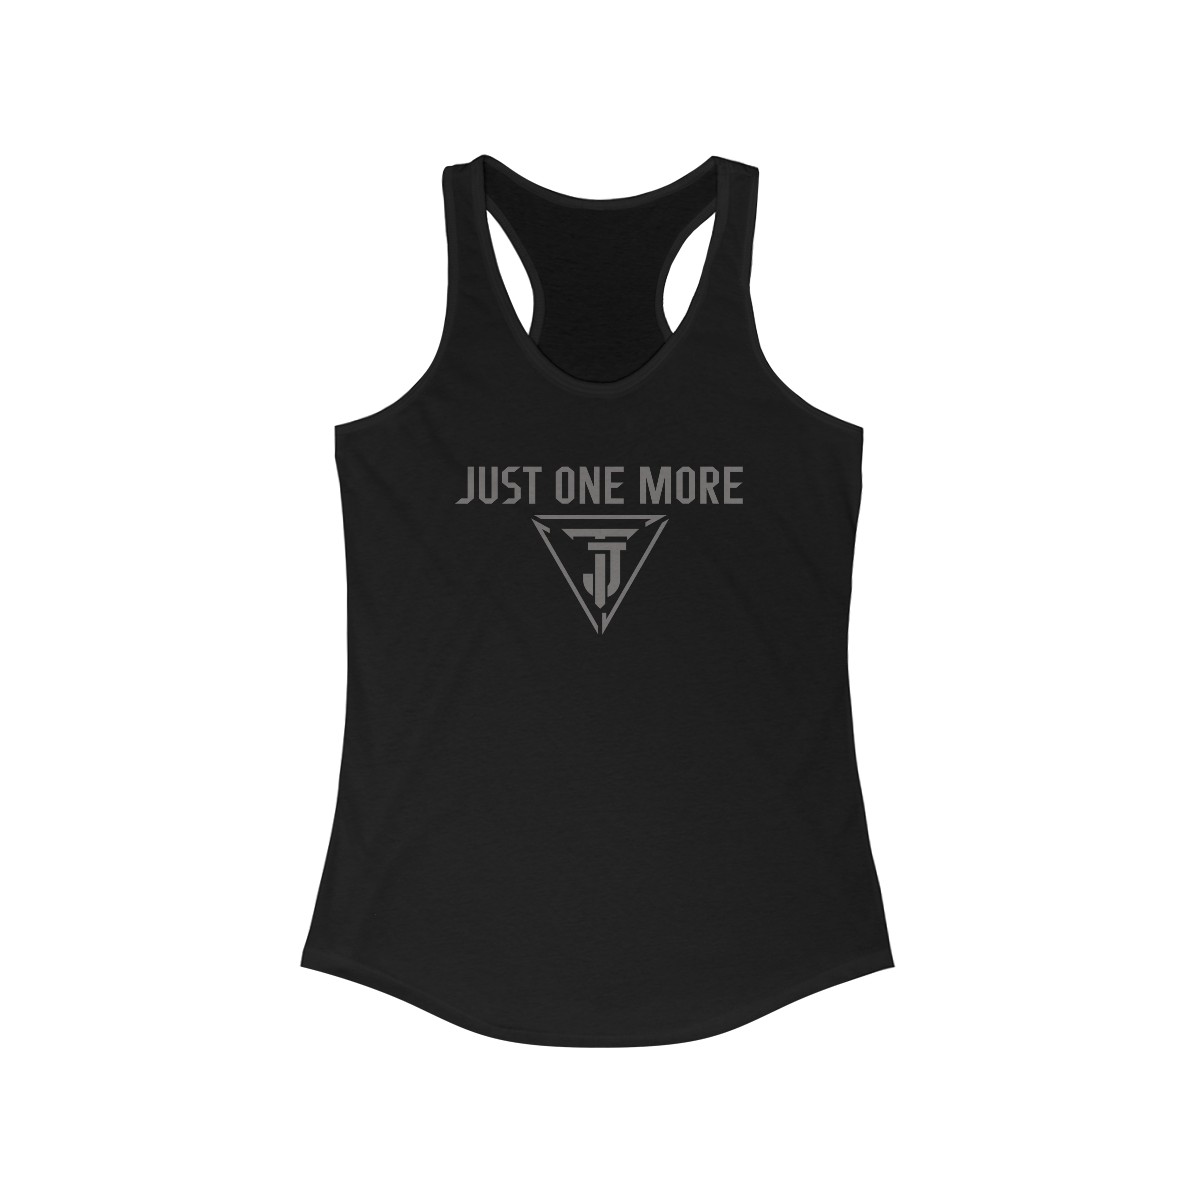 Women's Racerback Tank "Just One More" product thumbnail image